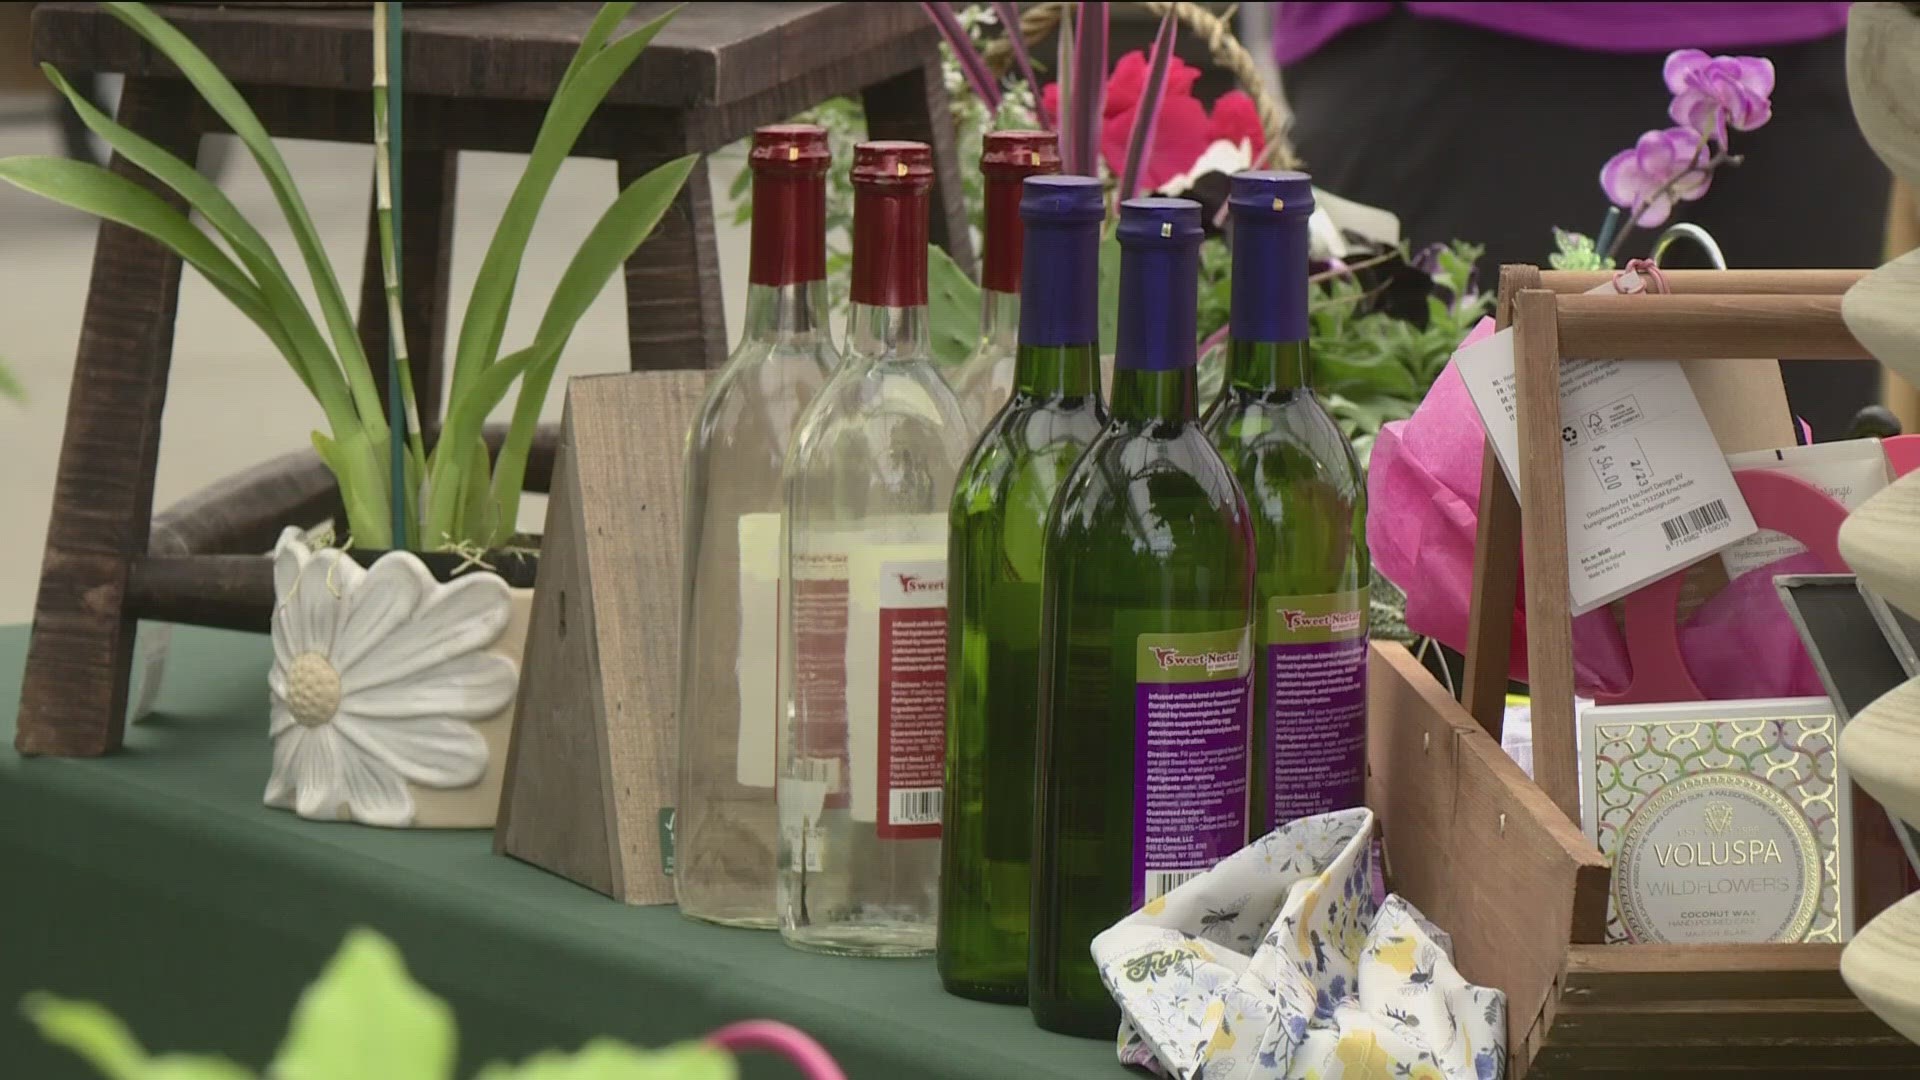 Mother's Day is just a little over a week away, and if your mom likes to do some gardening, KTVB's Jim Duthie has some perfect ideas for a gift.